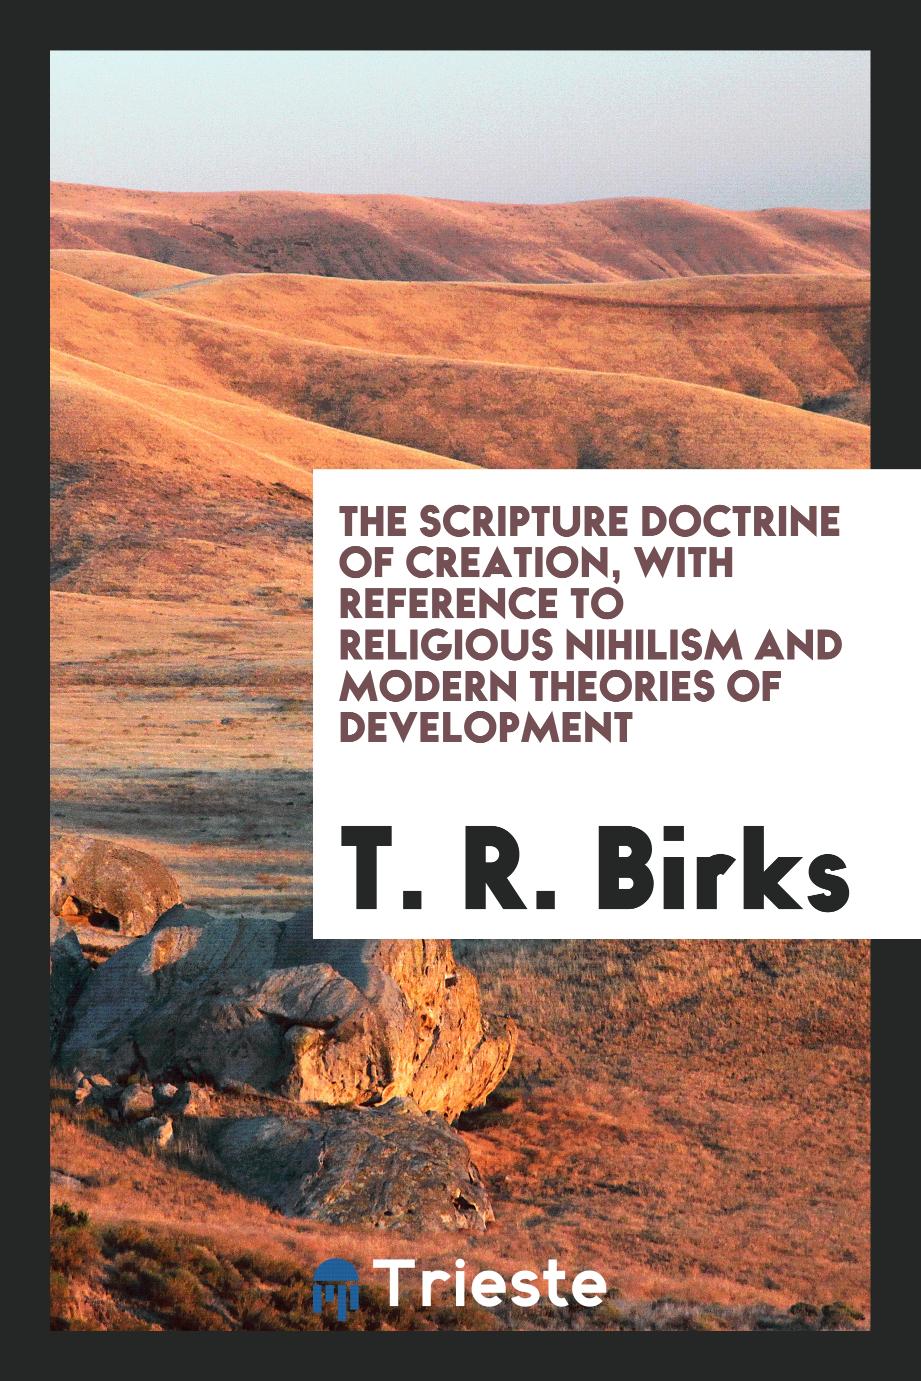 The Scripture Doctrine of Creation, with Reference to Religious Nihilism and Modern Theories of Development